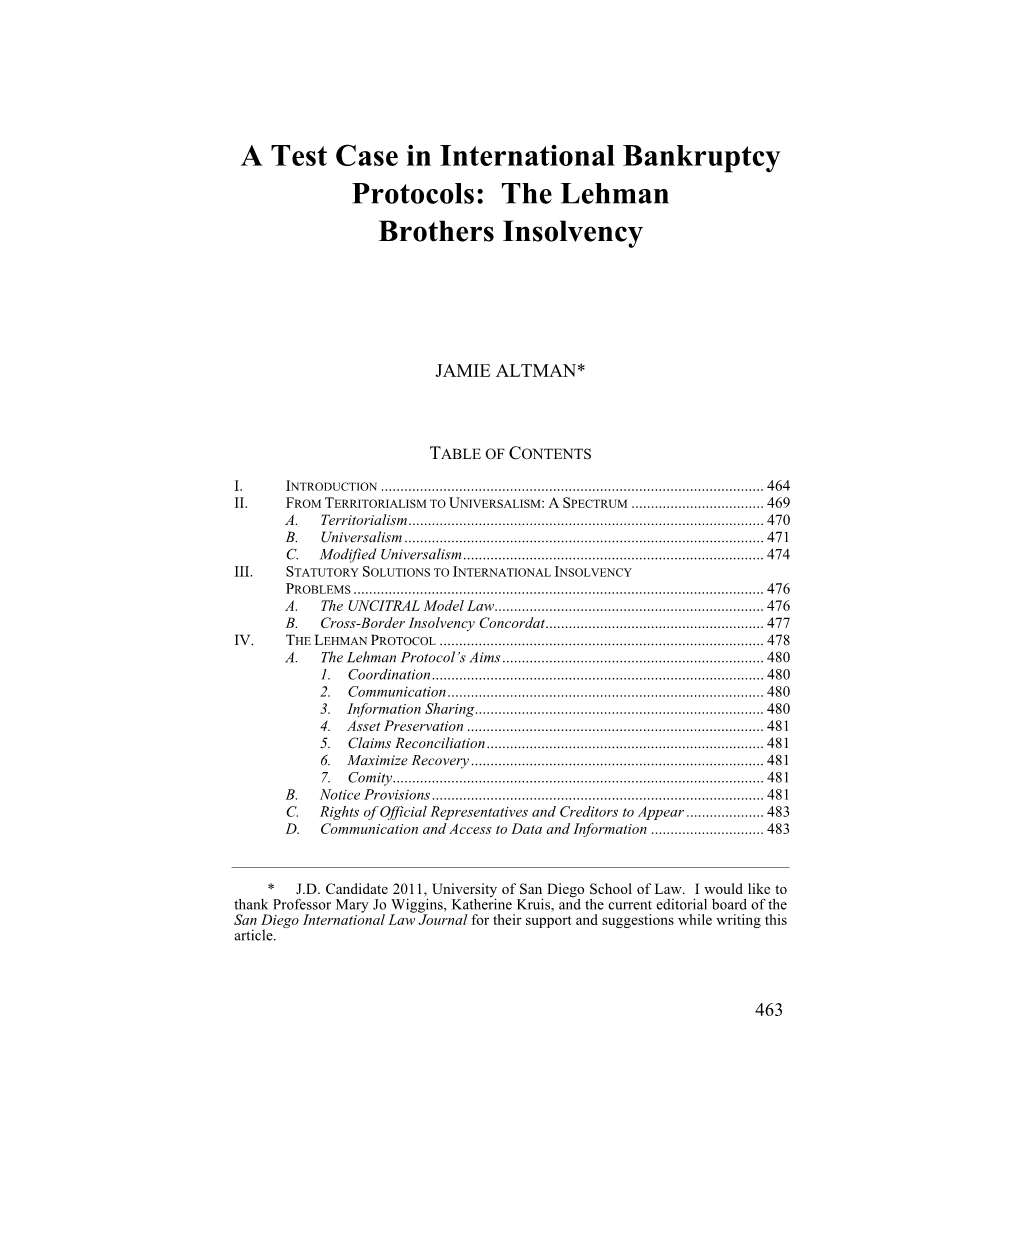 A Test Case in International Bankruptcy Protocols: the Lehman Brothers Insolvency